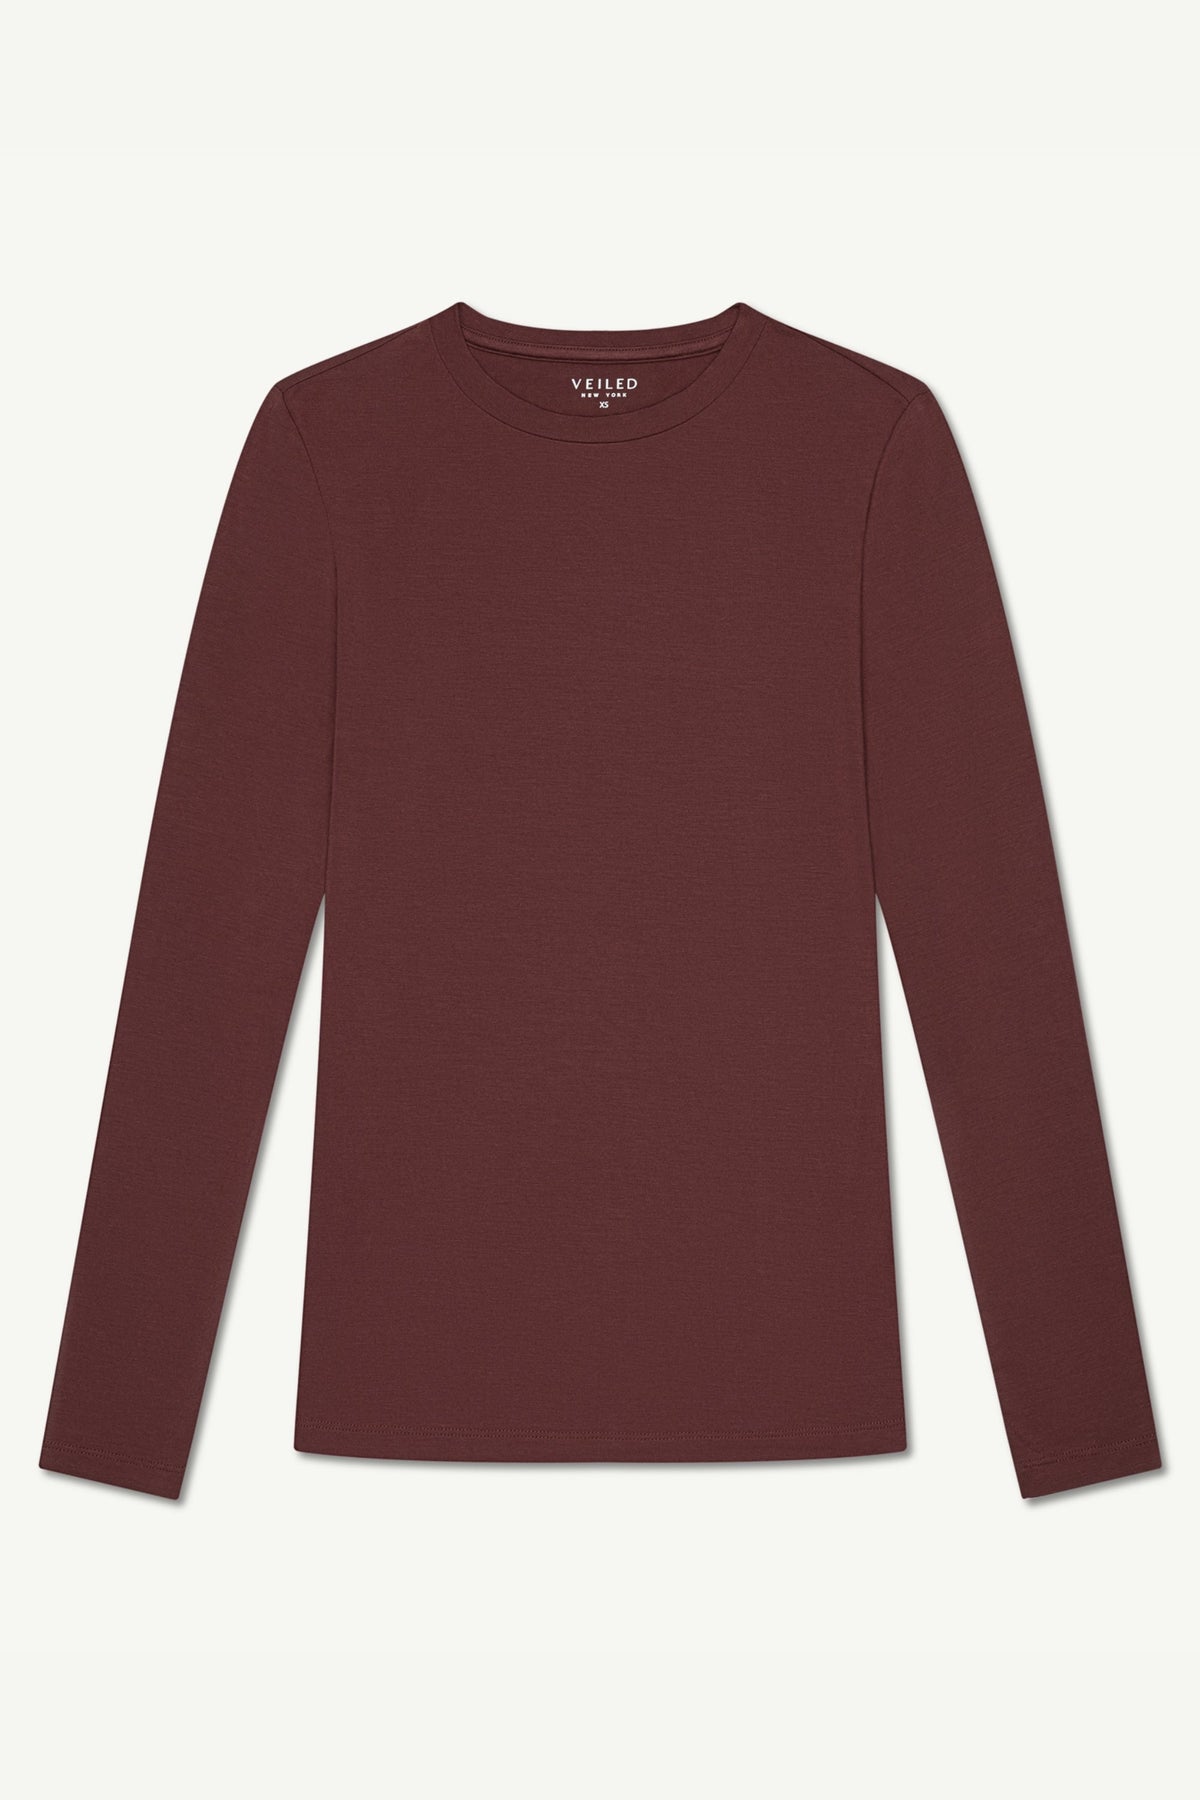 Essential Crew Neck Bamboo Jersey Top - Brown Clothing epschoolboard 